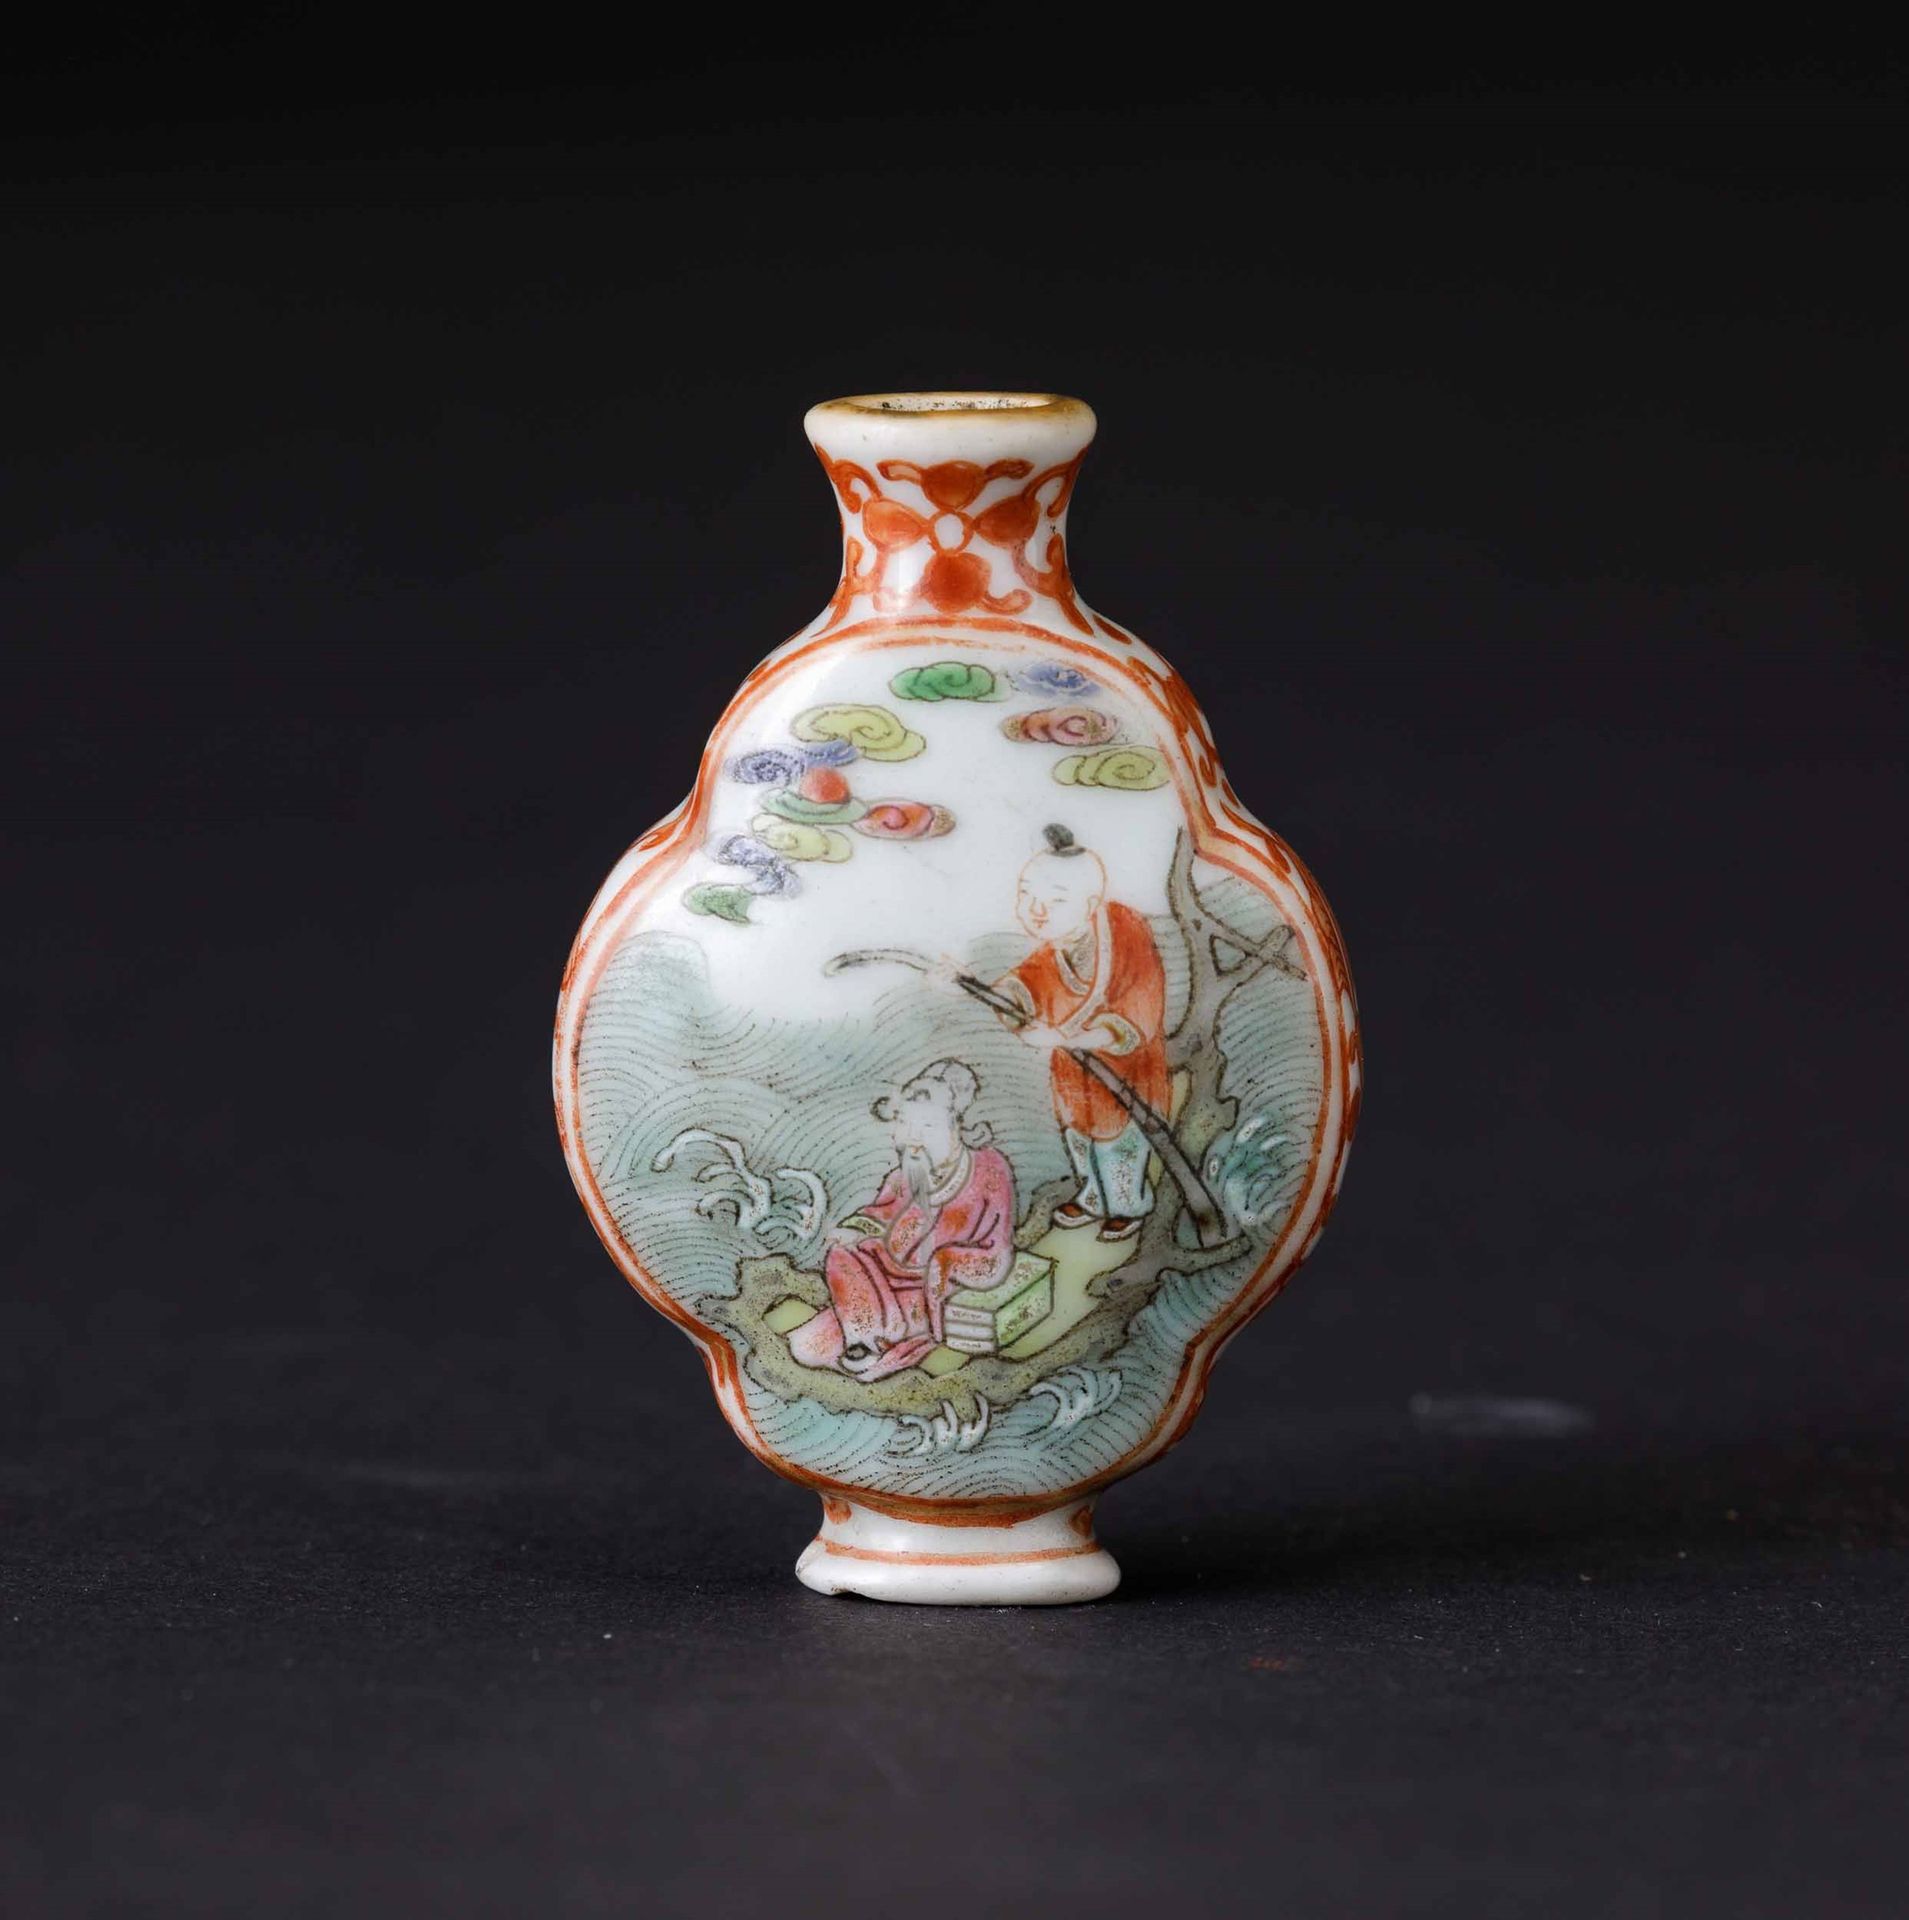 A porcelain snuff bottle, China, Qing Dynasty Jiaqing-Periode (1796-1820). H 6cm